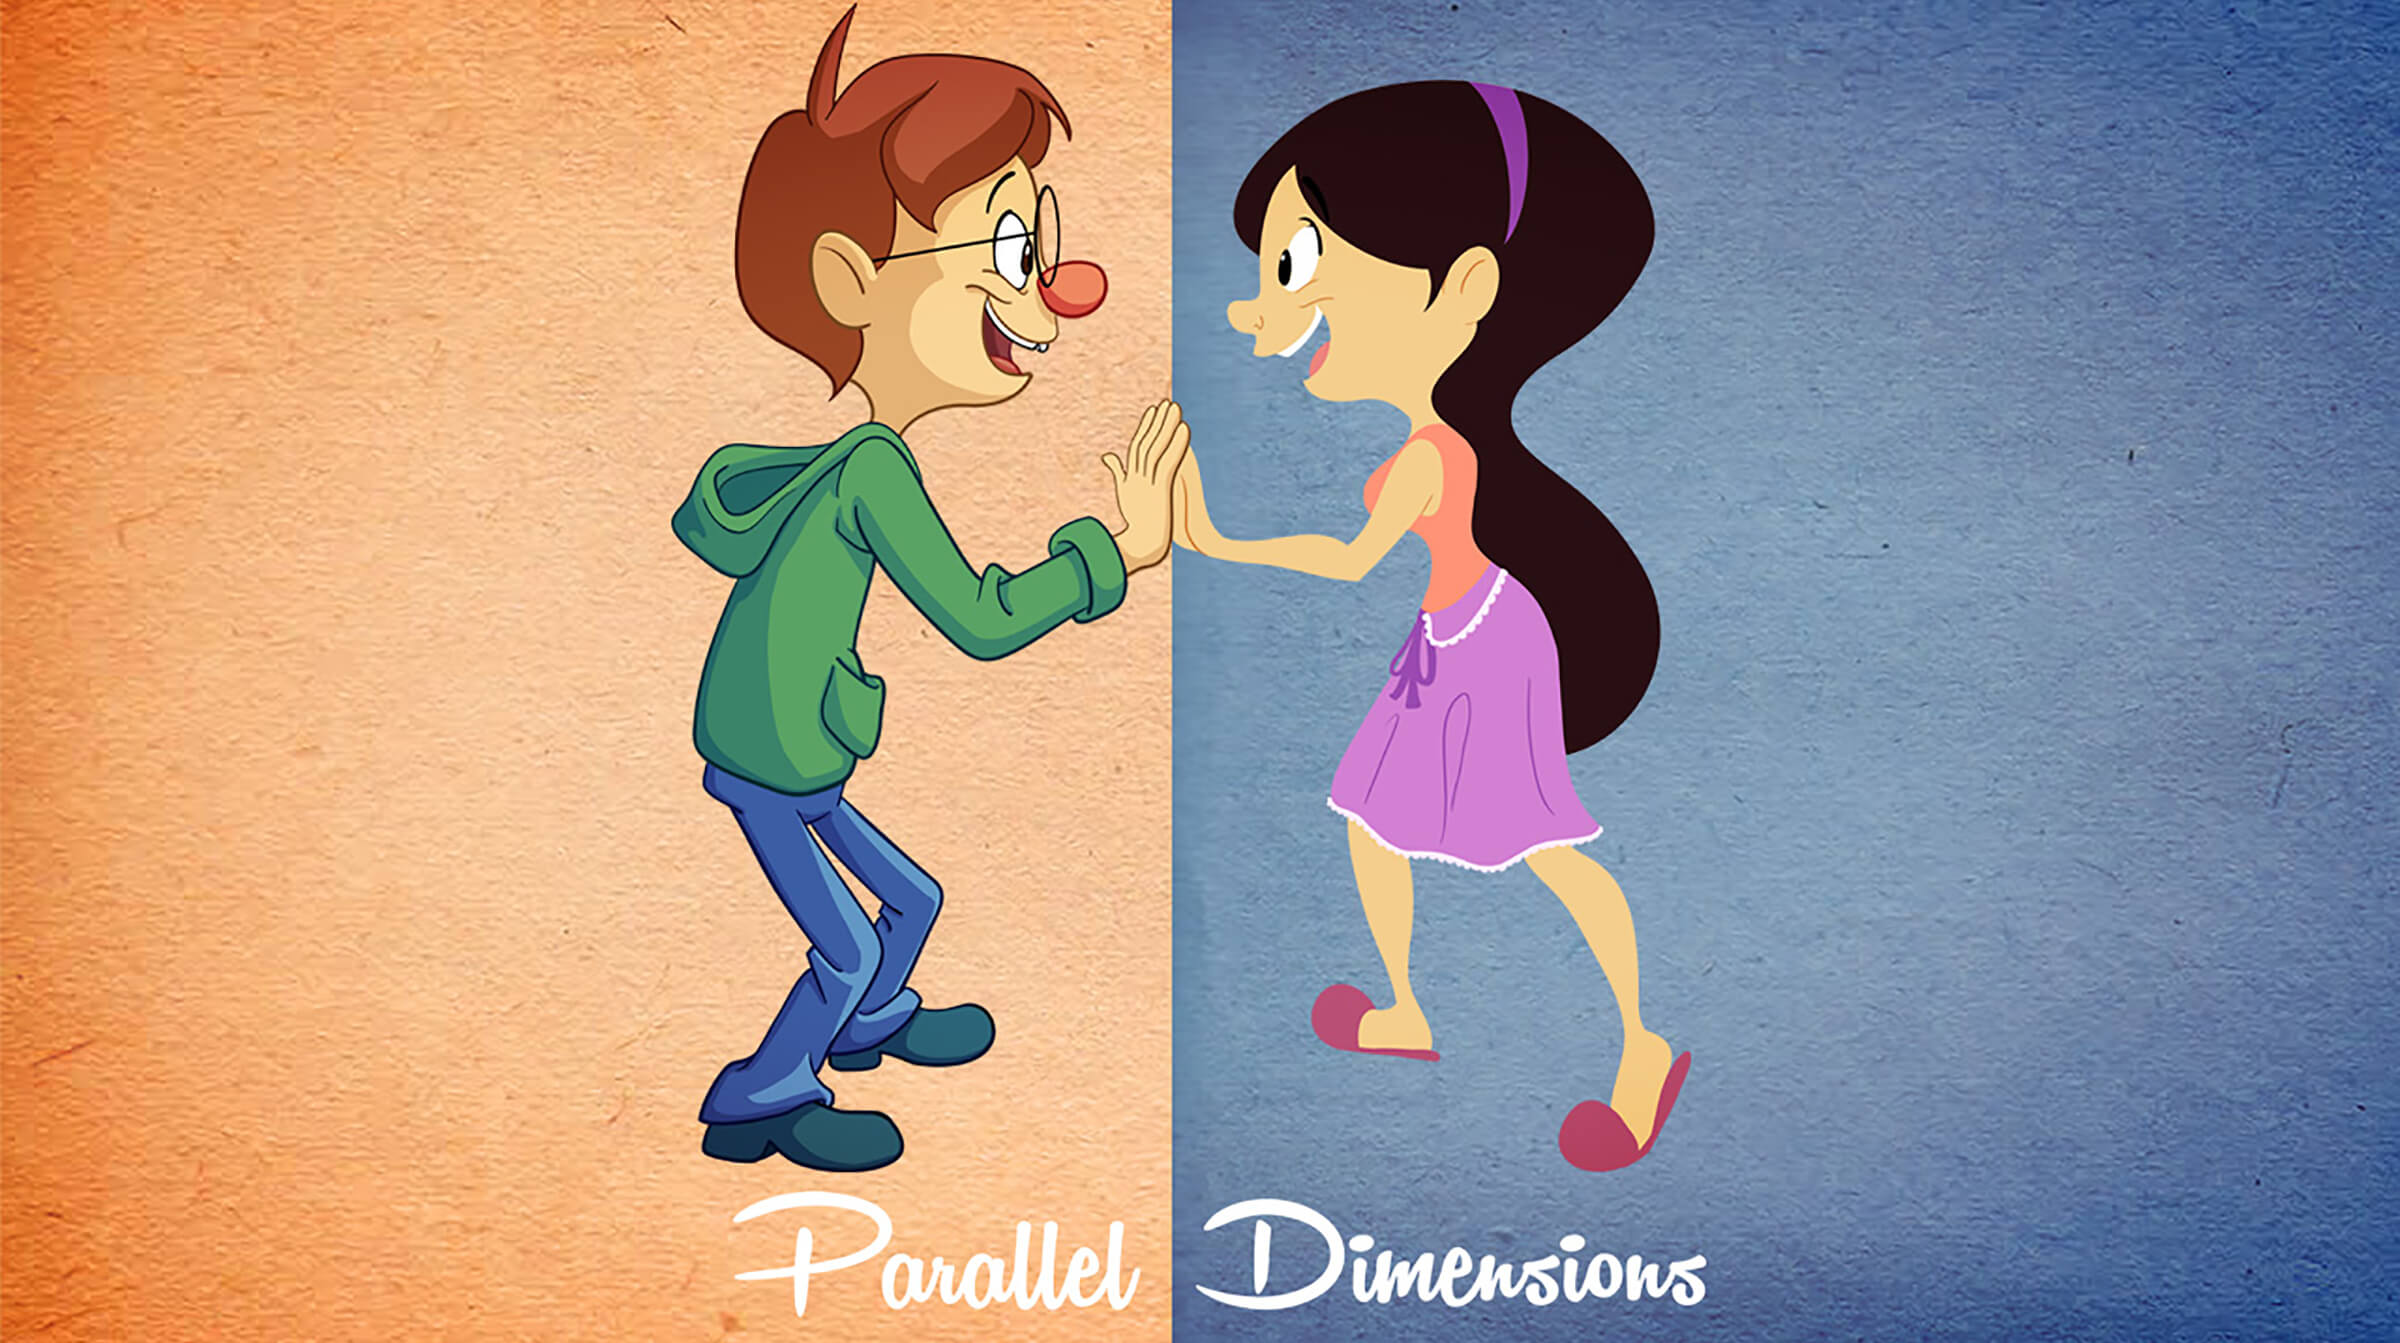 digital painting of cartoonish male and female characters giving each other a high five